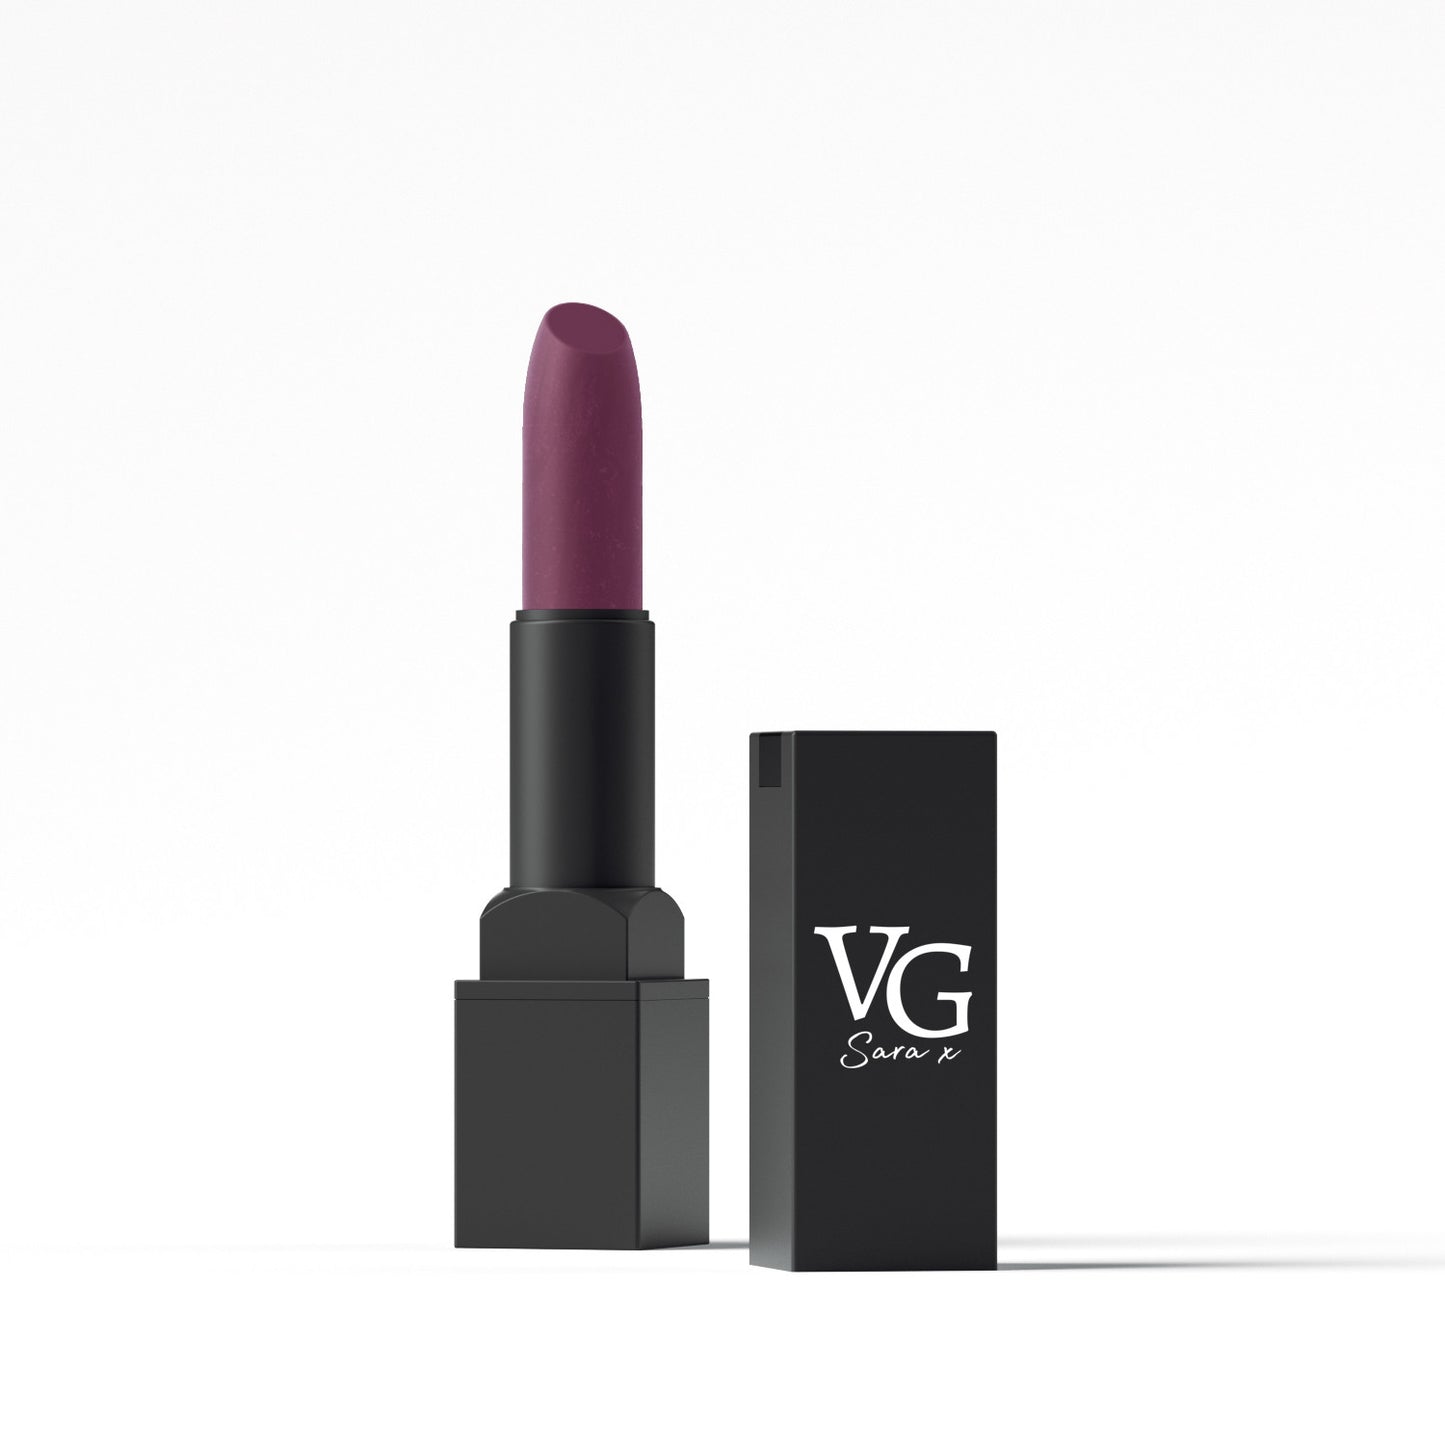 Naturally Long-Lasting Lipstick in purple shade by VG